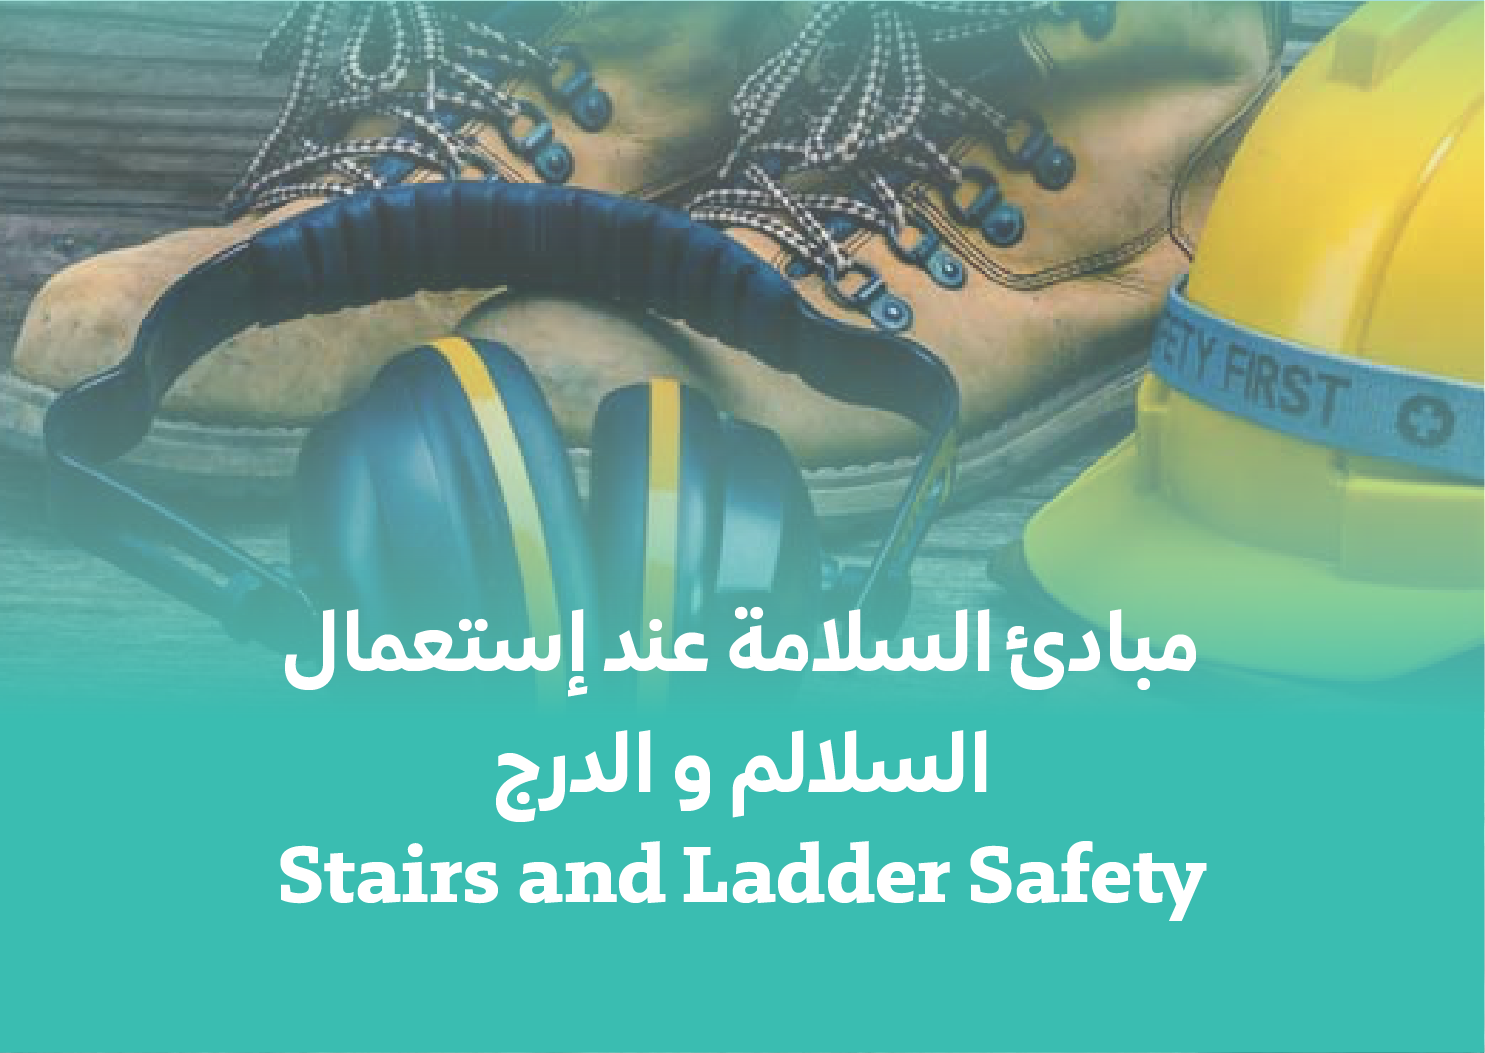 Stairs and Ladders Safety